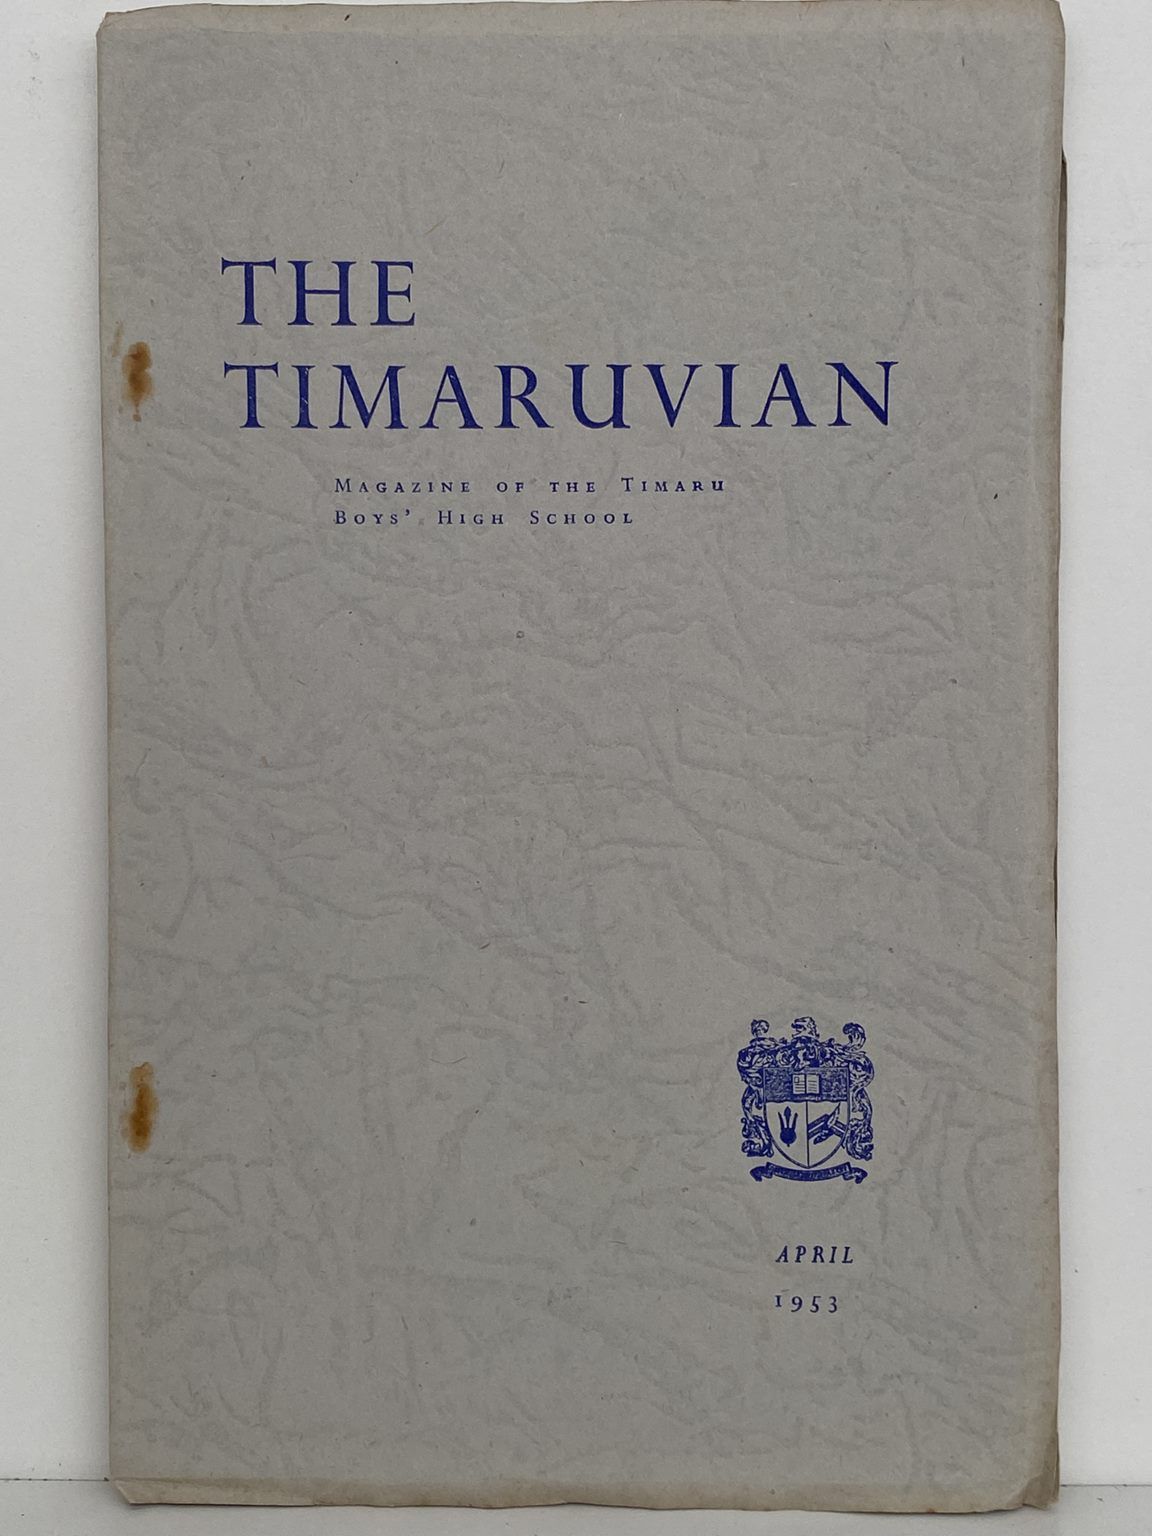 THE TIMARUVIAN: Magazine of the Timaru Boys' High School and its Old Boys' Association 1953